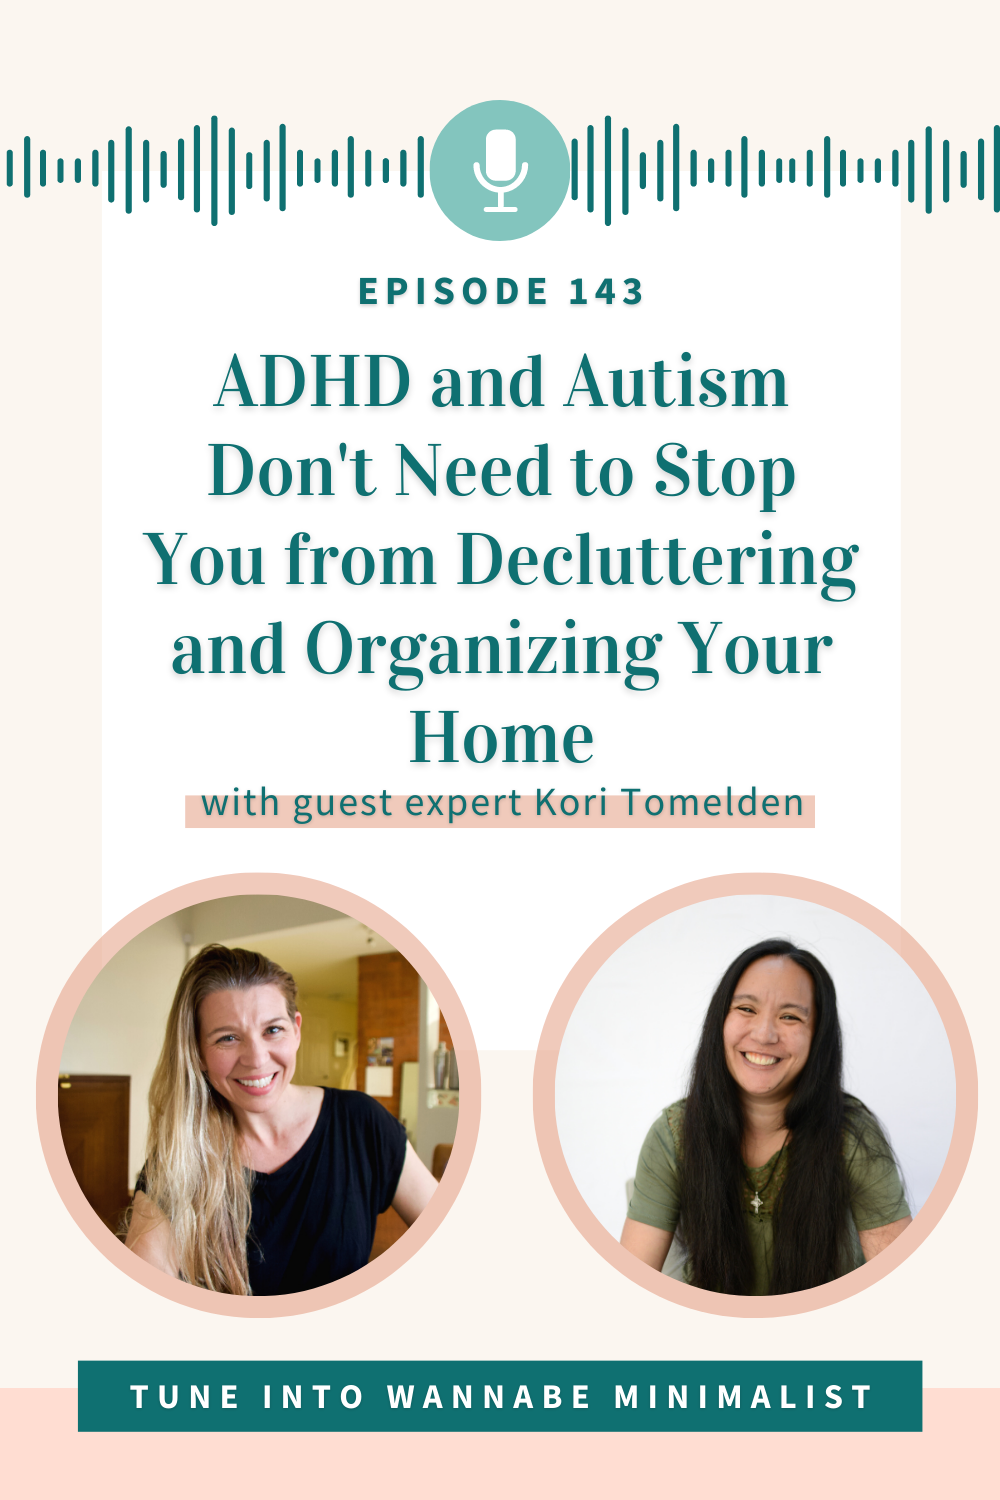 ADHD and Autism Don't Need to Stop You from Decluttering and Organizing Your Home